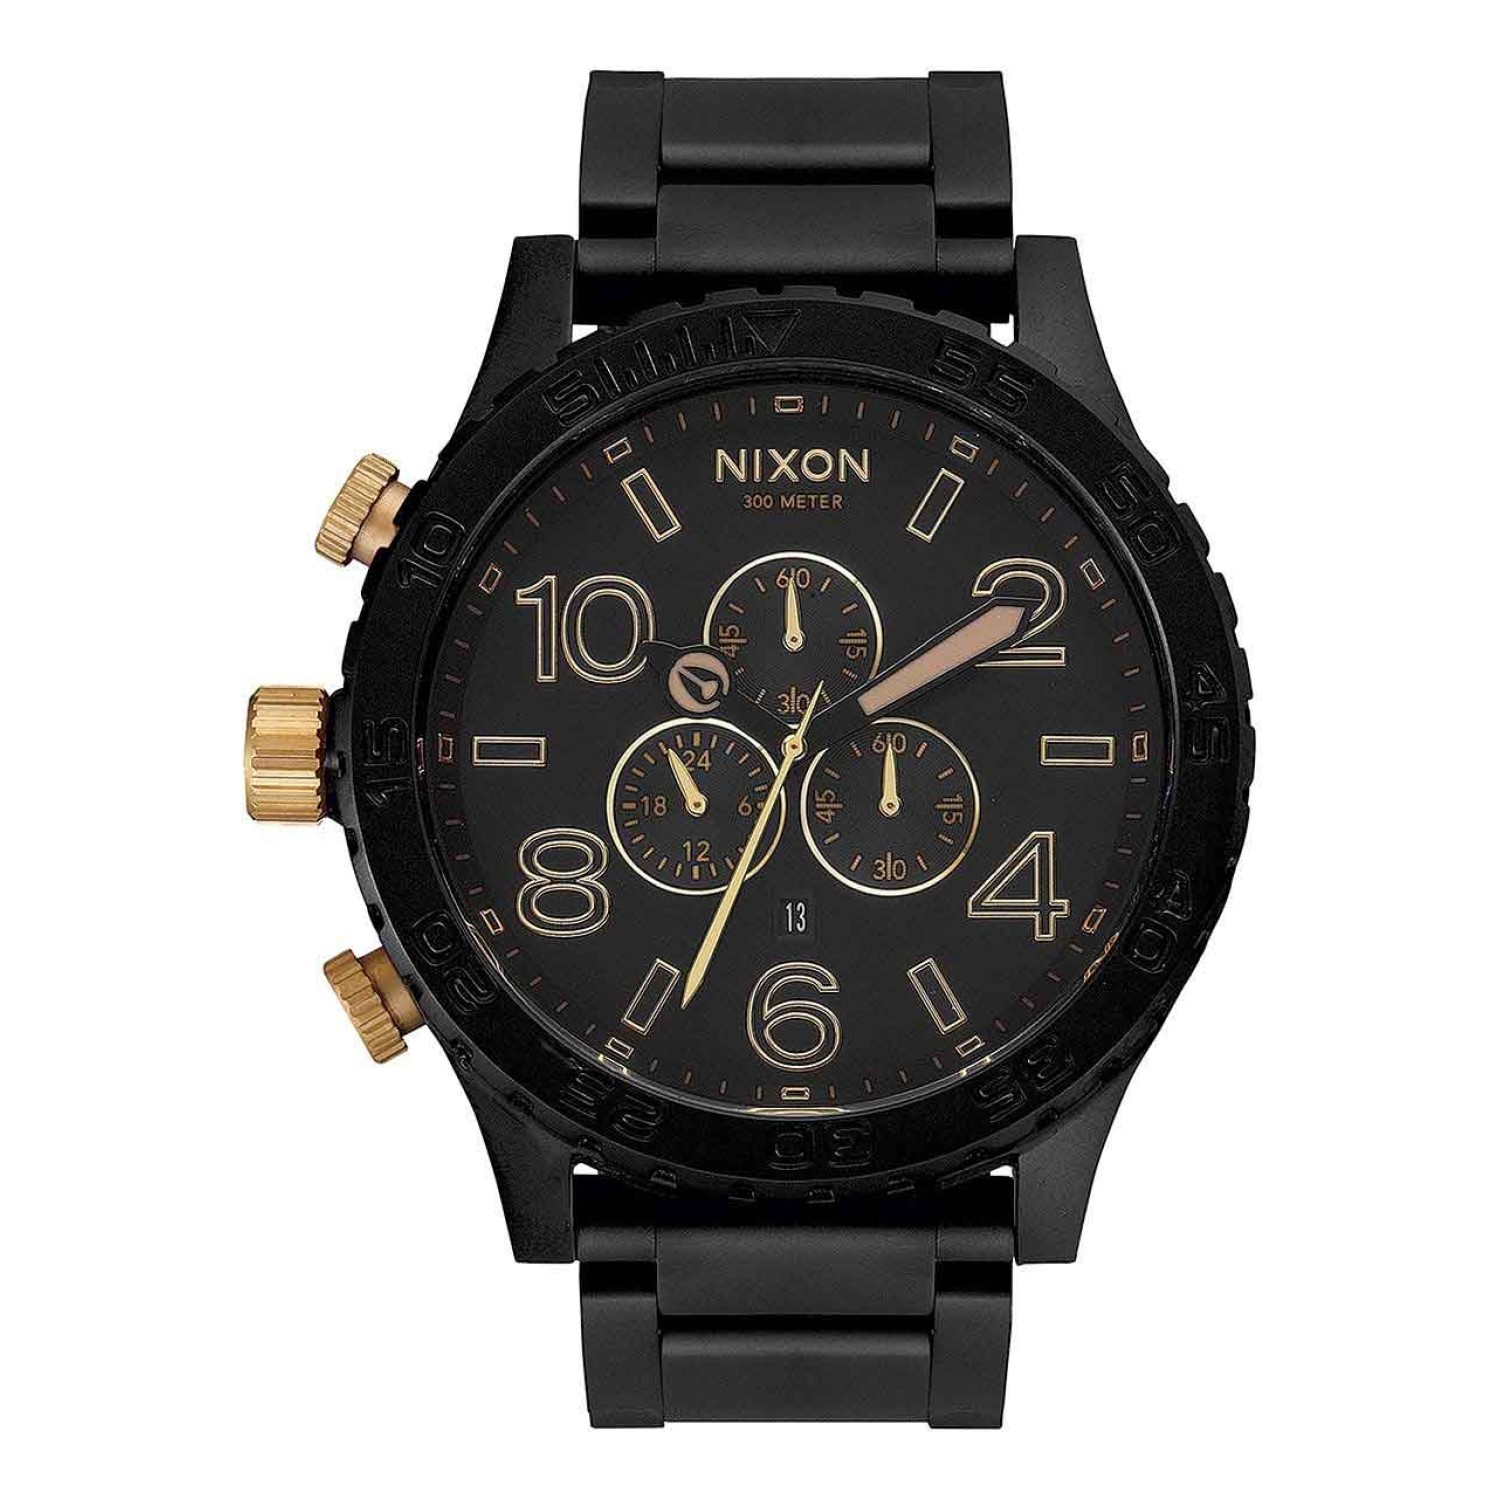 A083-1041-00 NIXON Mens 51-30 Chronograph Watch. Good looks, brains and brawn combined. The 51-30 Chrono rates second-to-none. Handsome, easy-to-read 51 mm design that launched the oversized trend, with 3 CD textured sub-dials - matt black and gold2 Year 